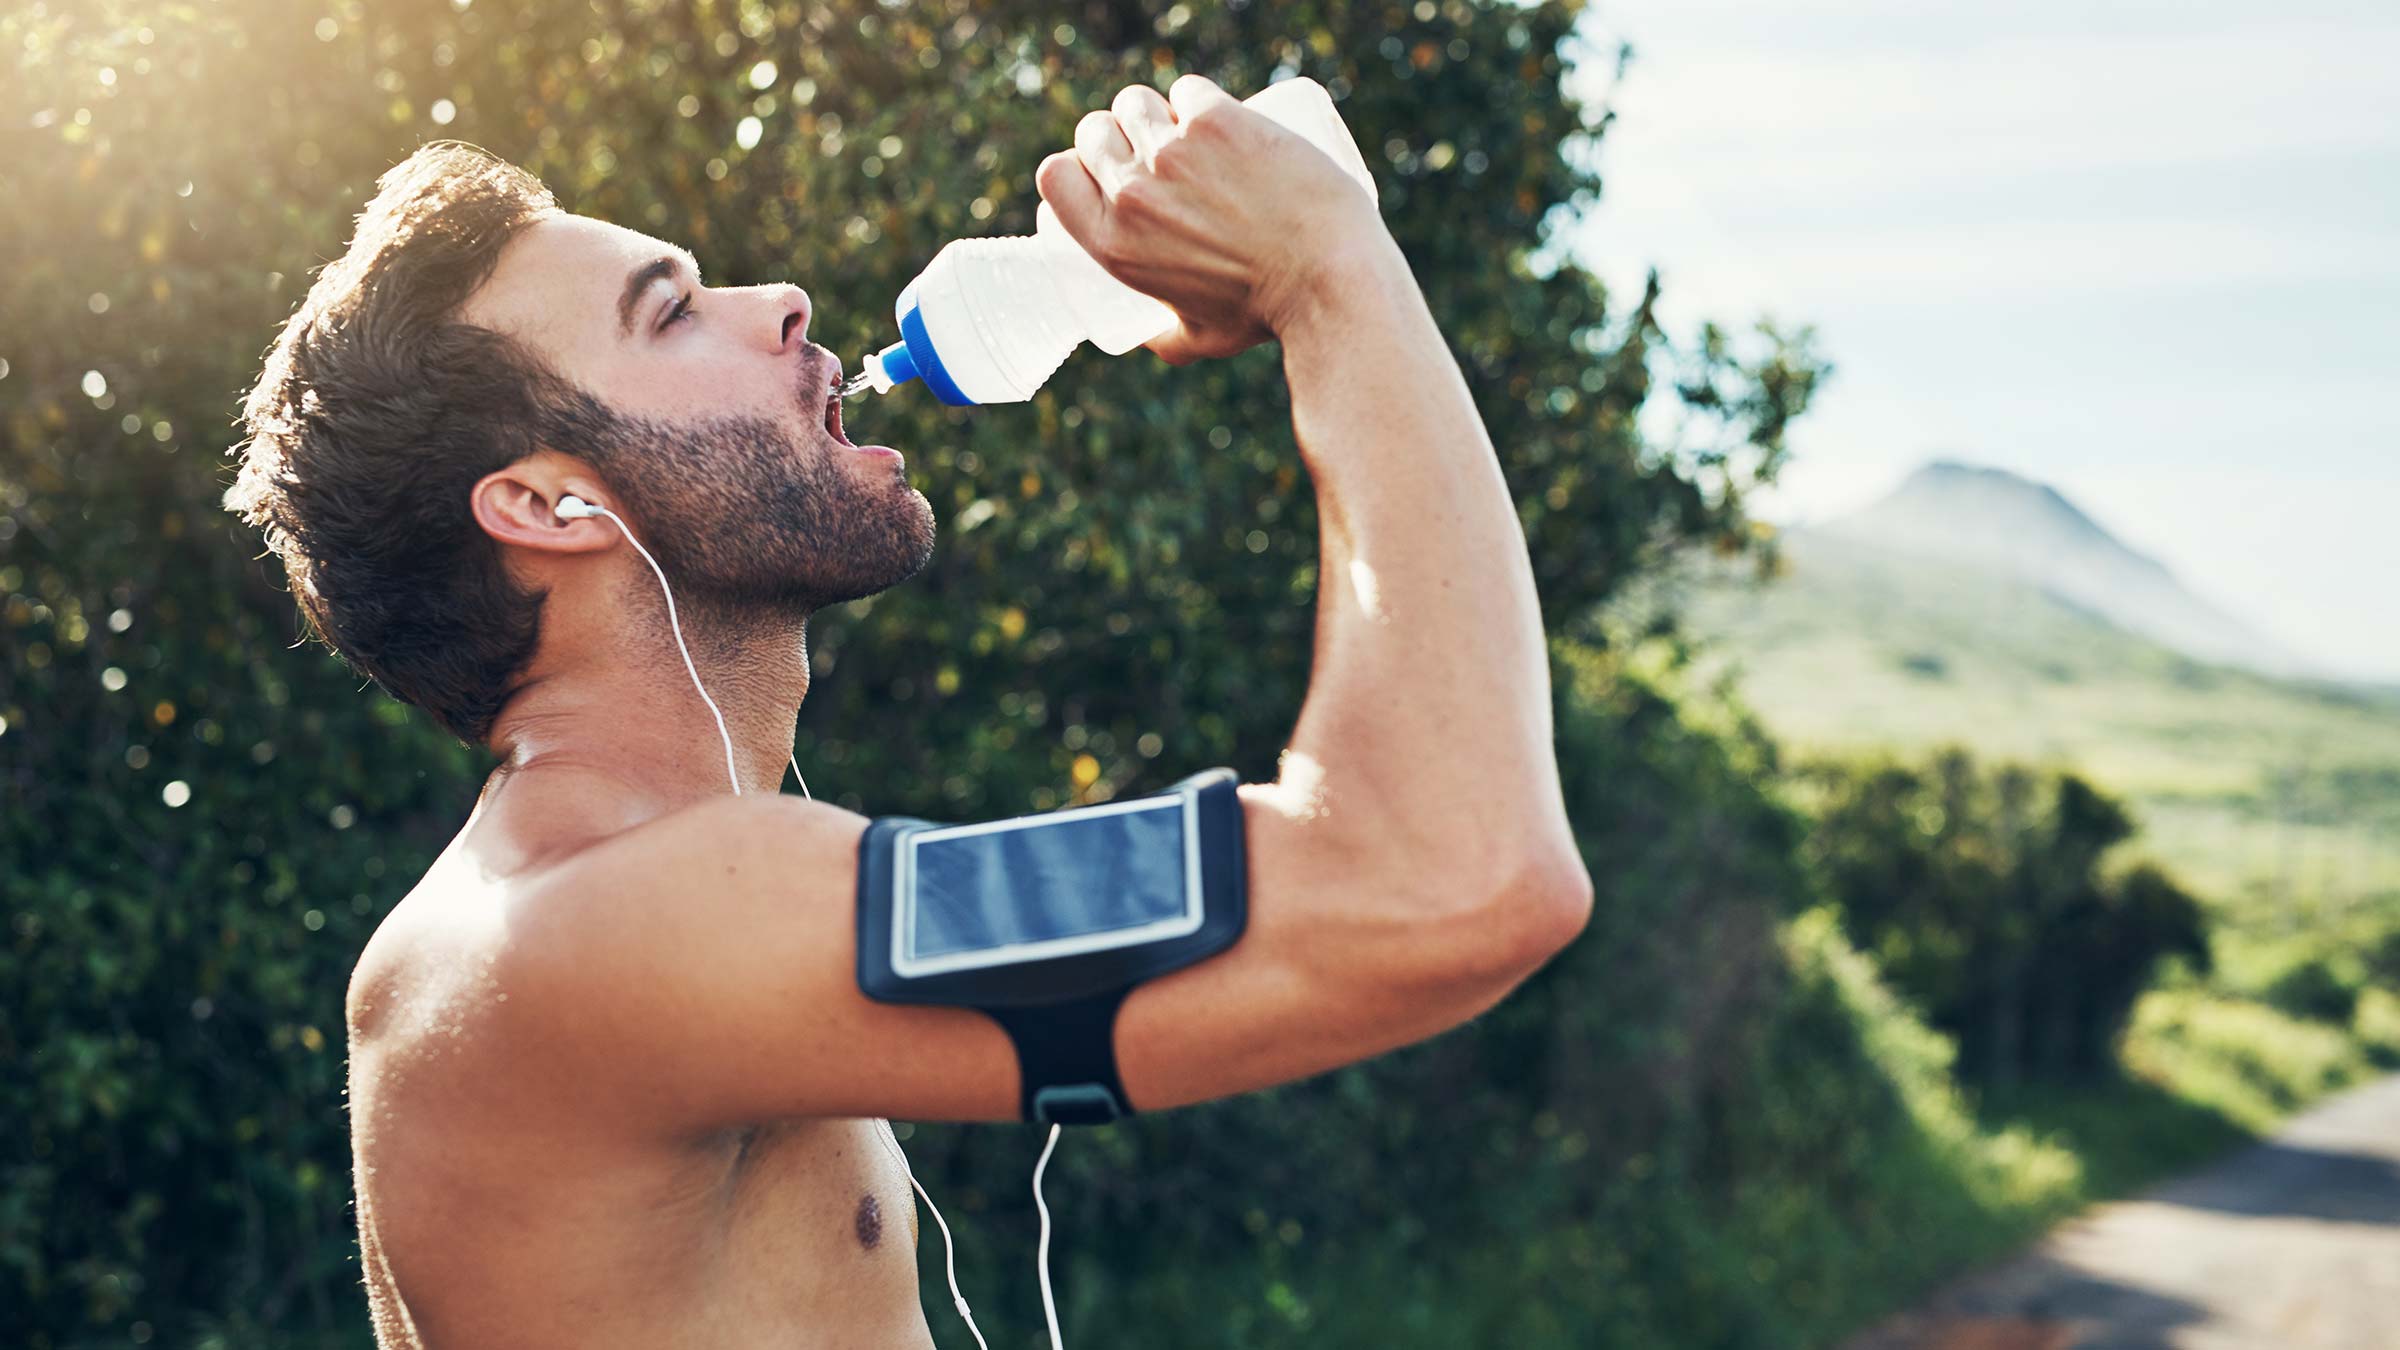 Athletic young man drinking from a water bottle while taking a break during a run